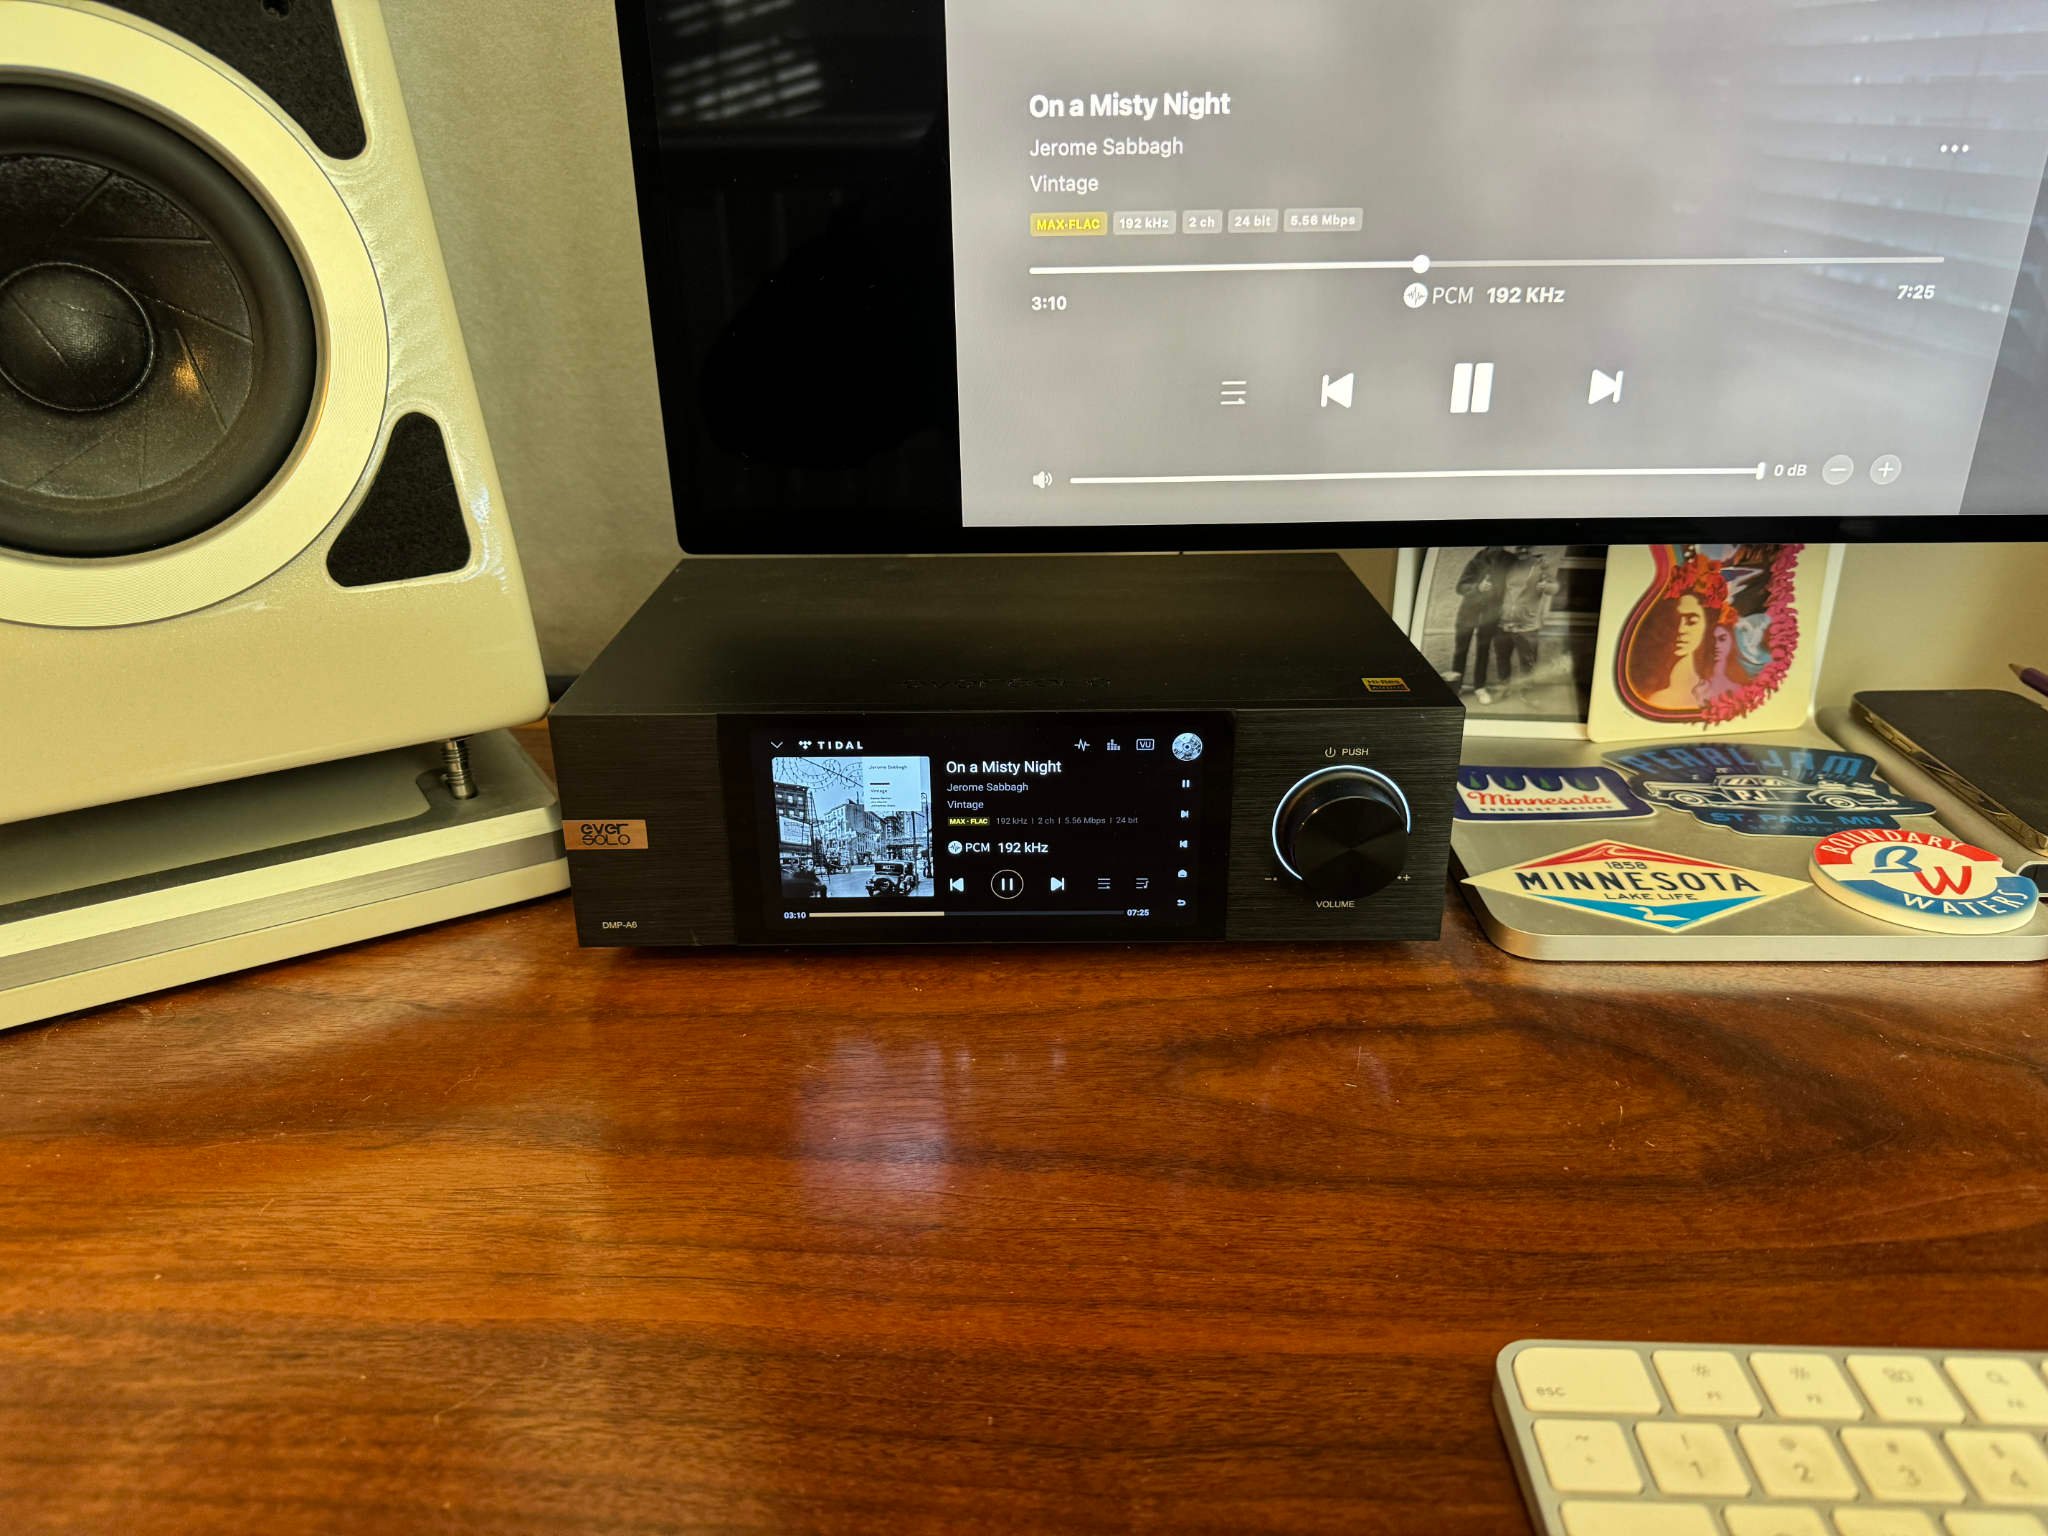 Defying Digital Streaming Expectations: EverSolo DMP-A6 Review